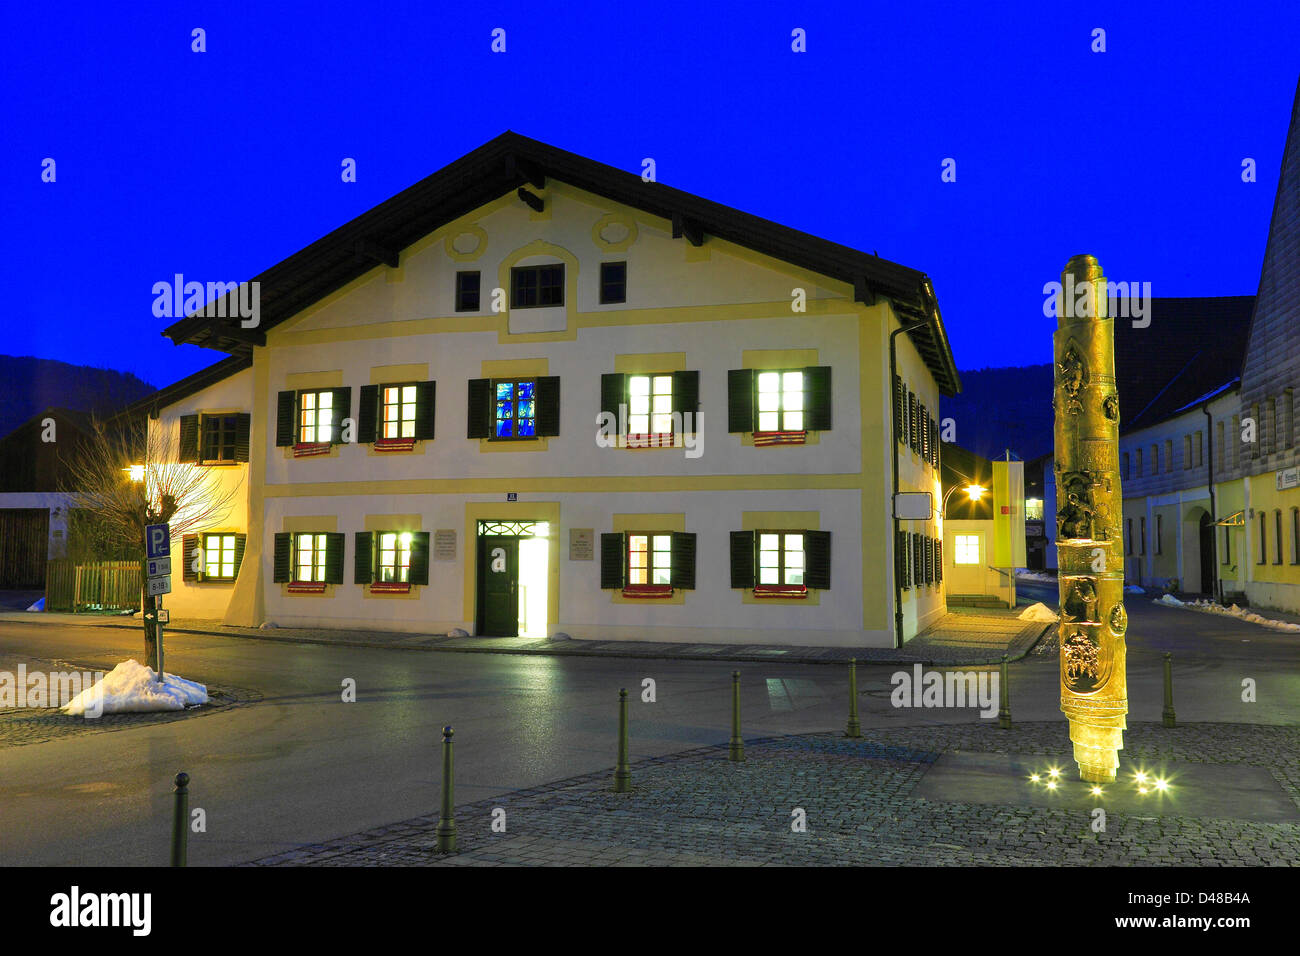 External view of the house in which Joseph Ratzinger was born in the Bavarian village Marktl. The image was taken just hours before his retirement from his Pontificate as Pope Benedict XVI. Stock Photo